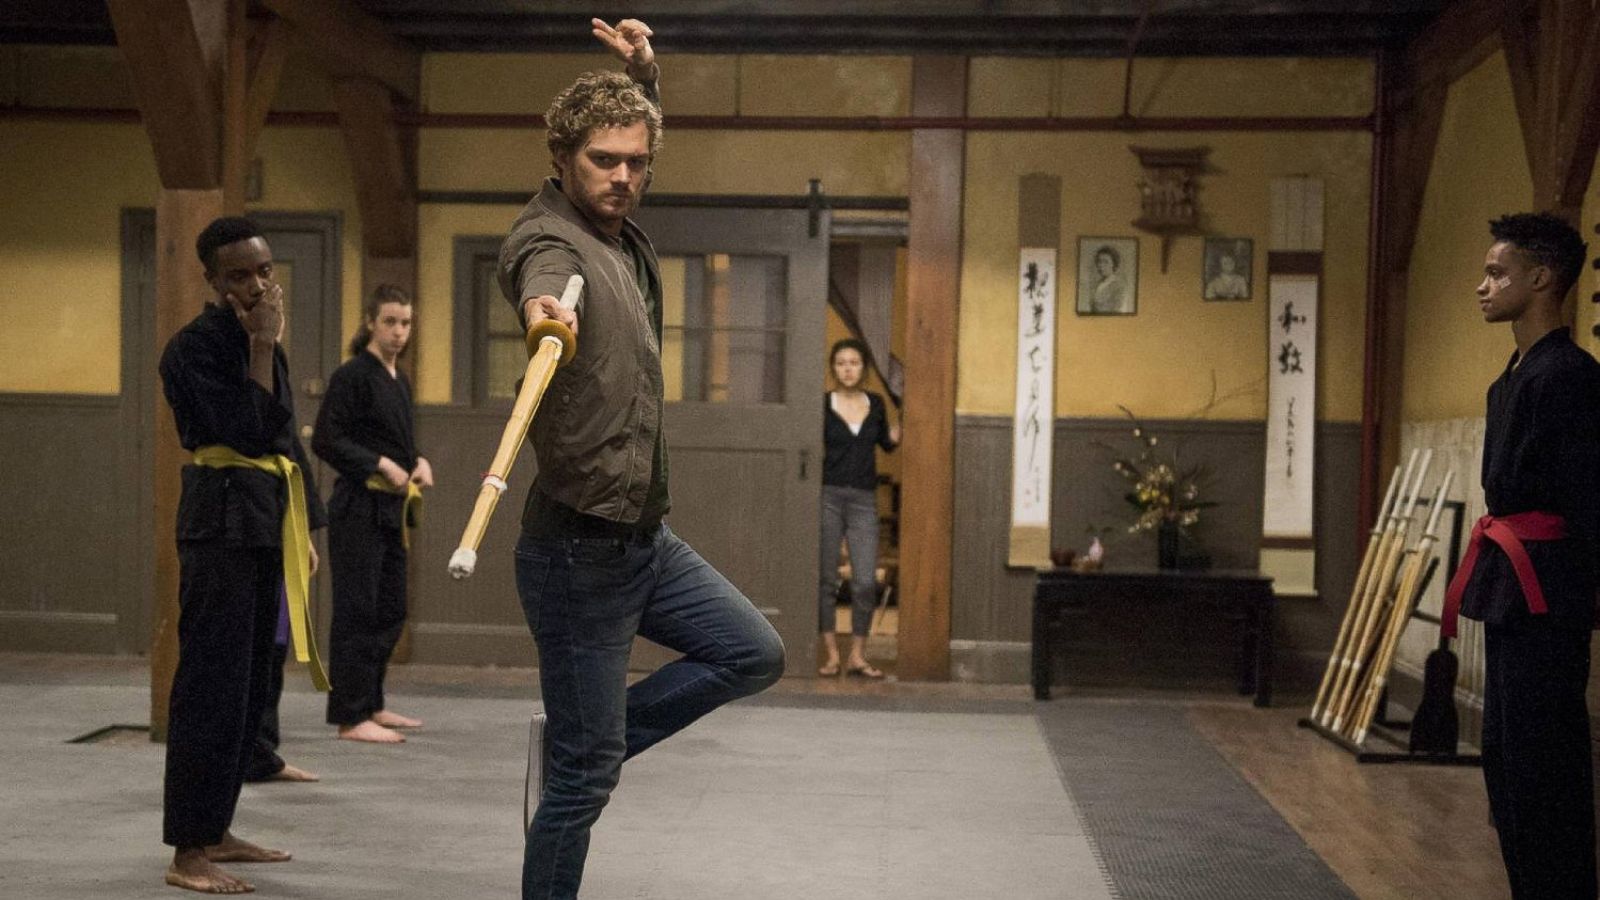 Marvel's 'Iron Fist' comes to Netflix